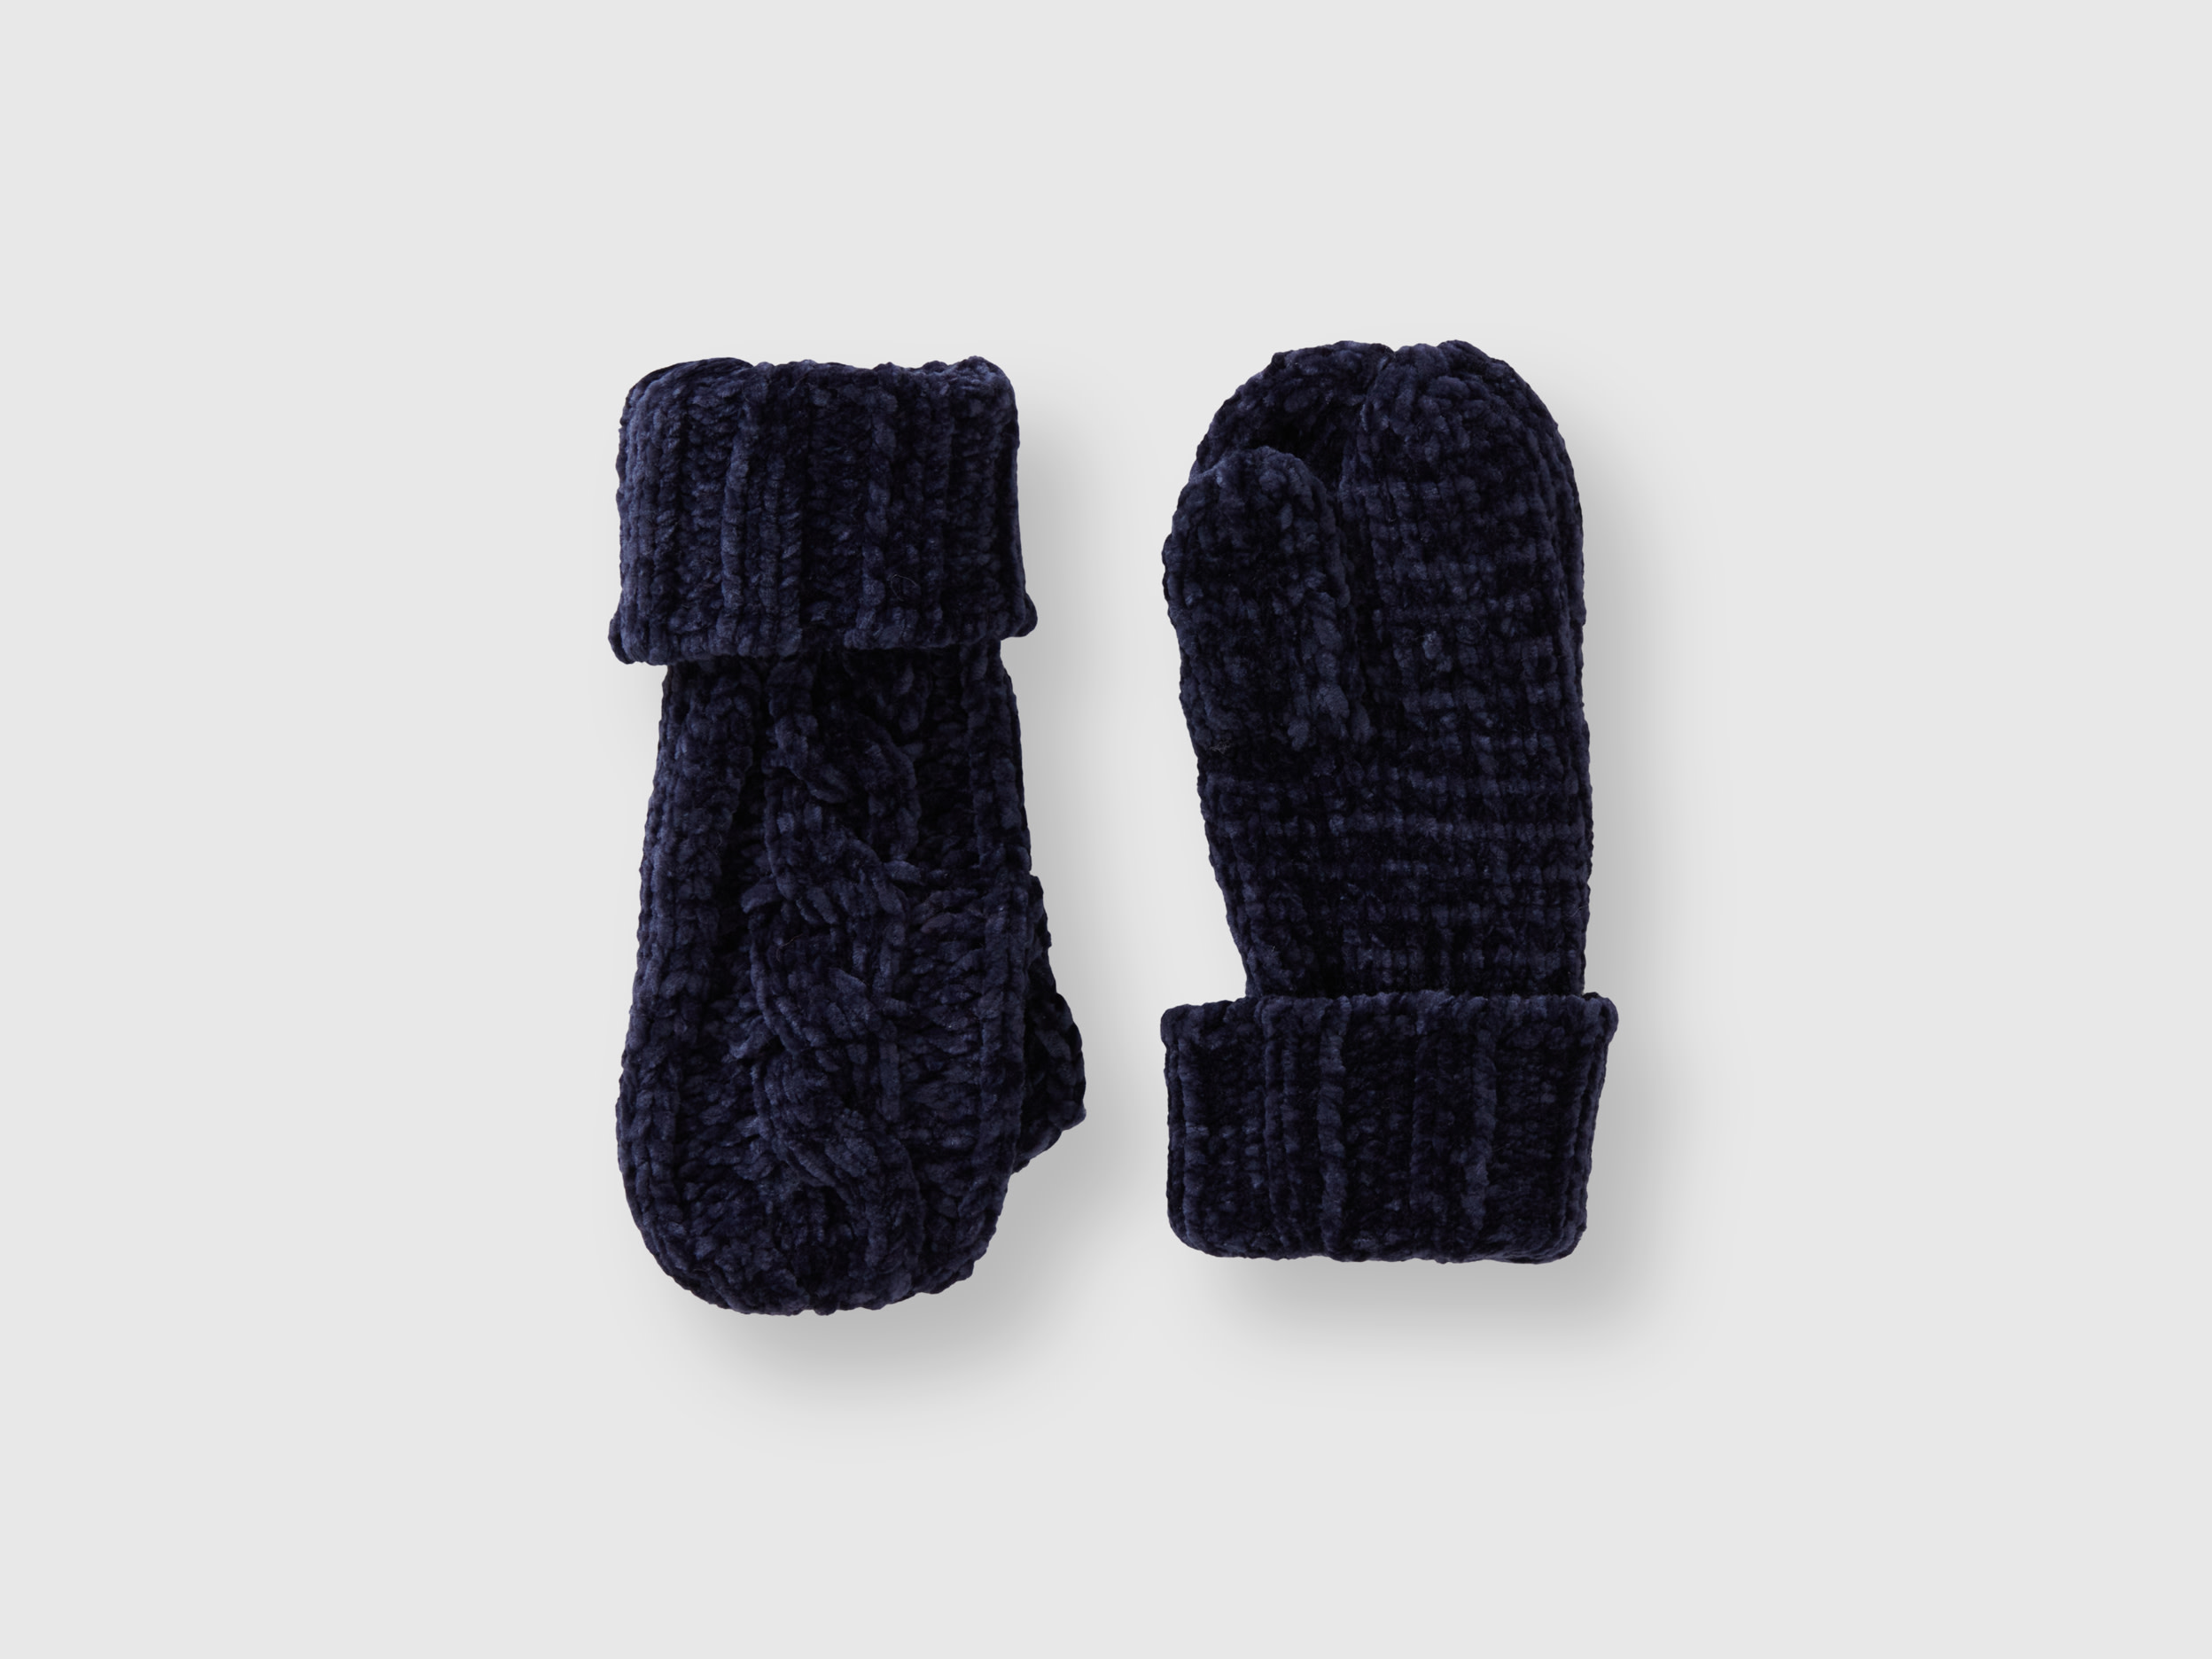 Benetton, Chenille Gloves With Cable Knit, size 4-6, Dark Blue, Kids